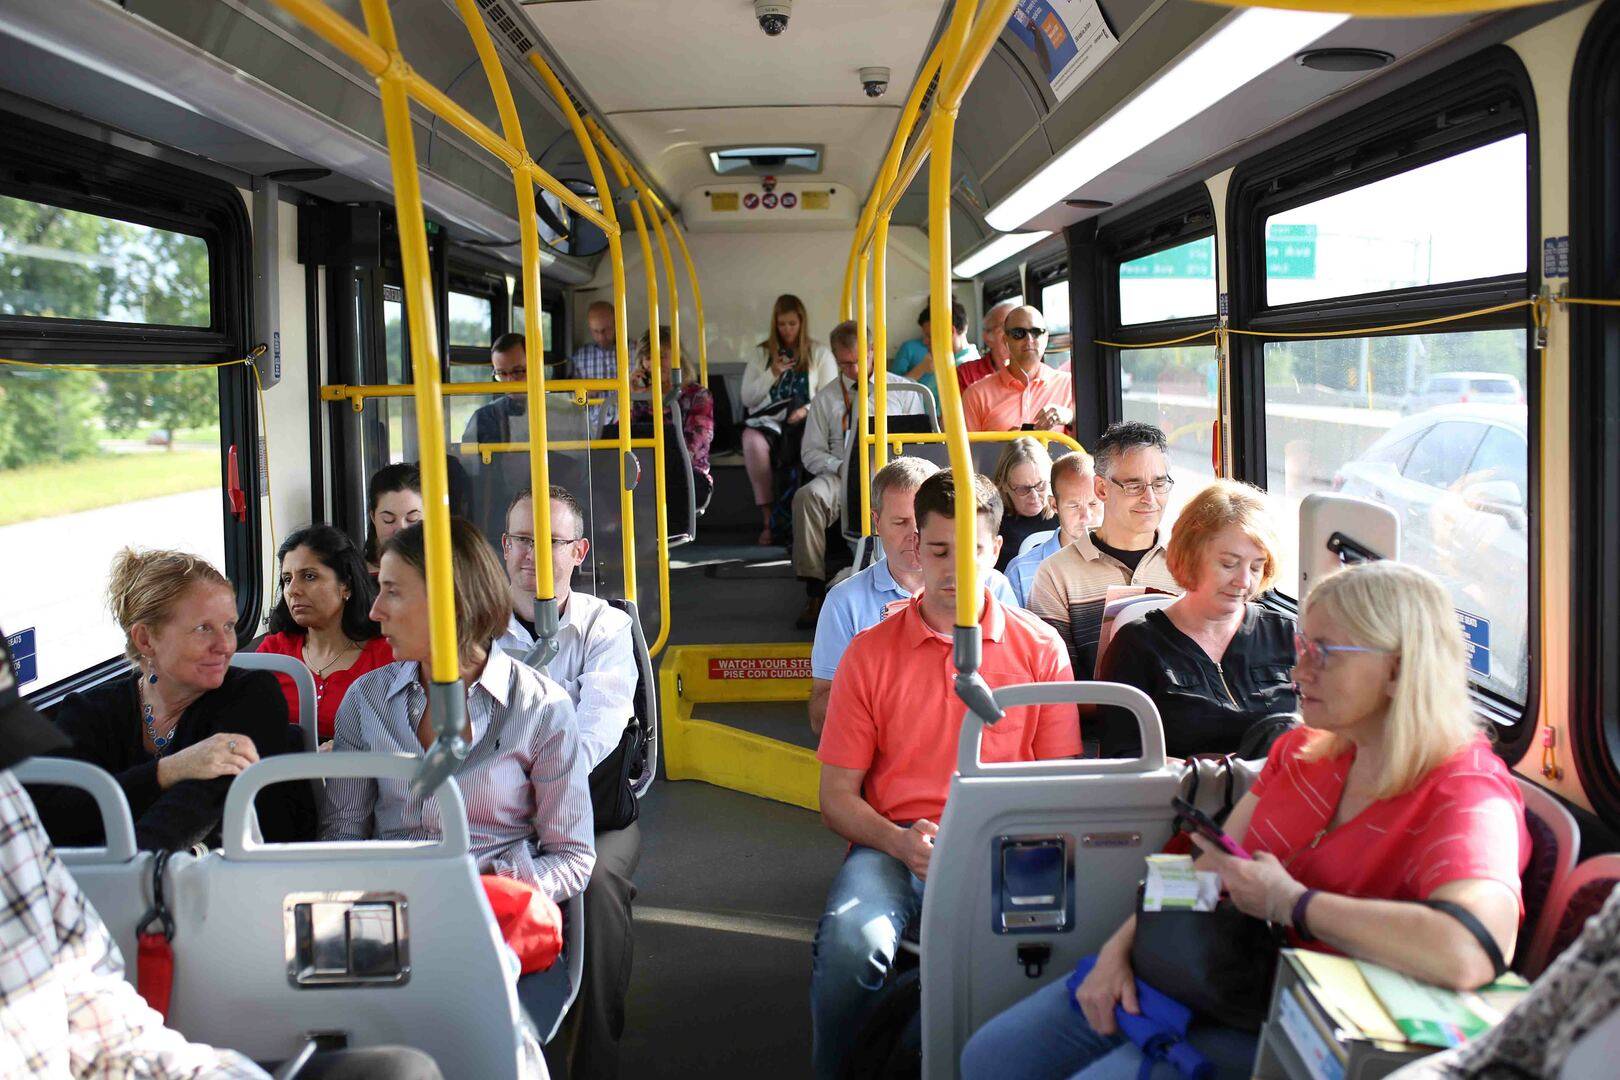 Inside look at a DART bus full of riders.